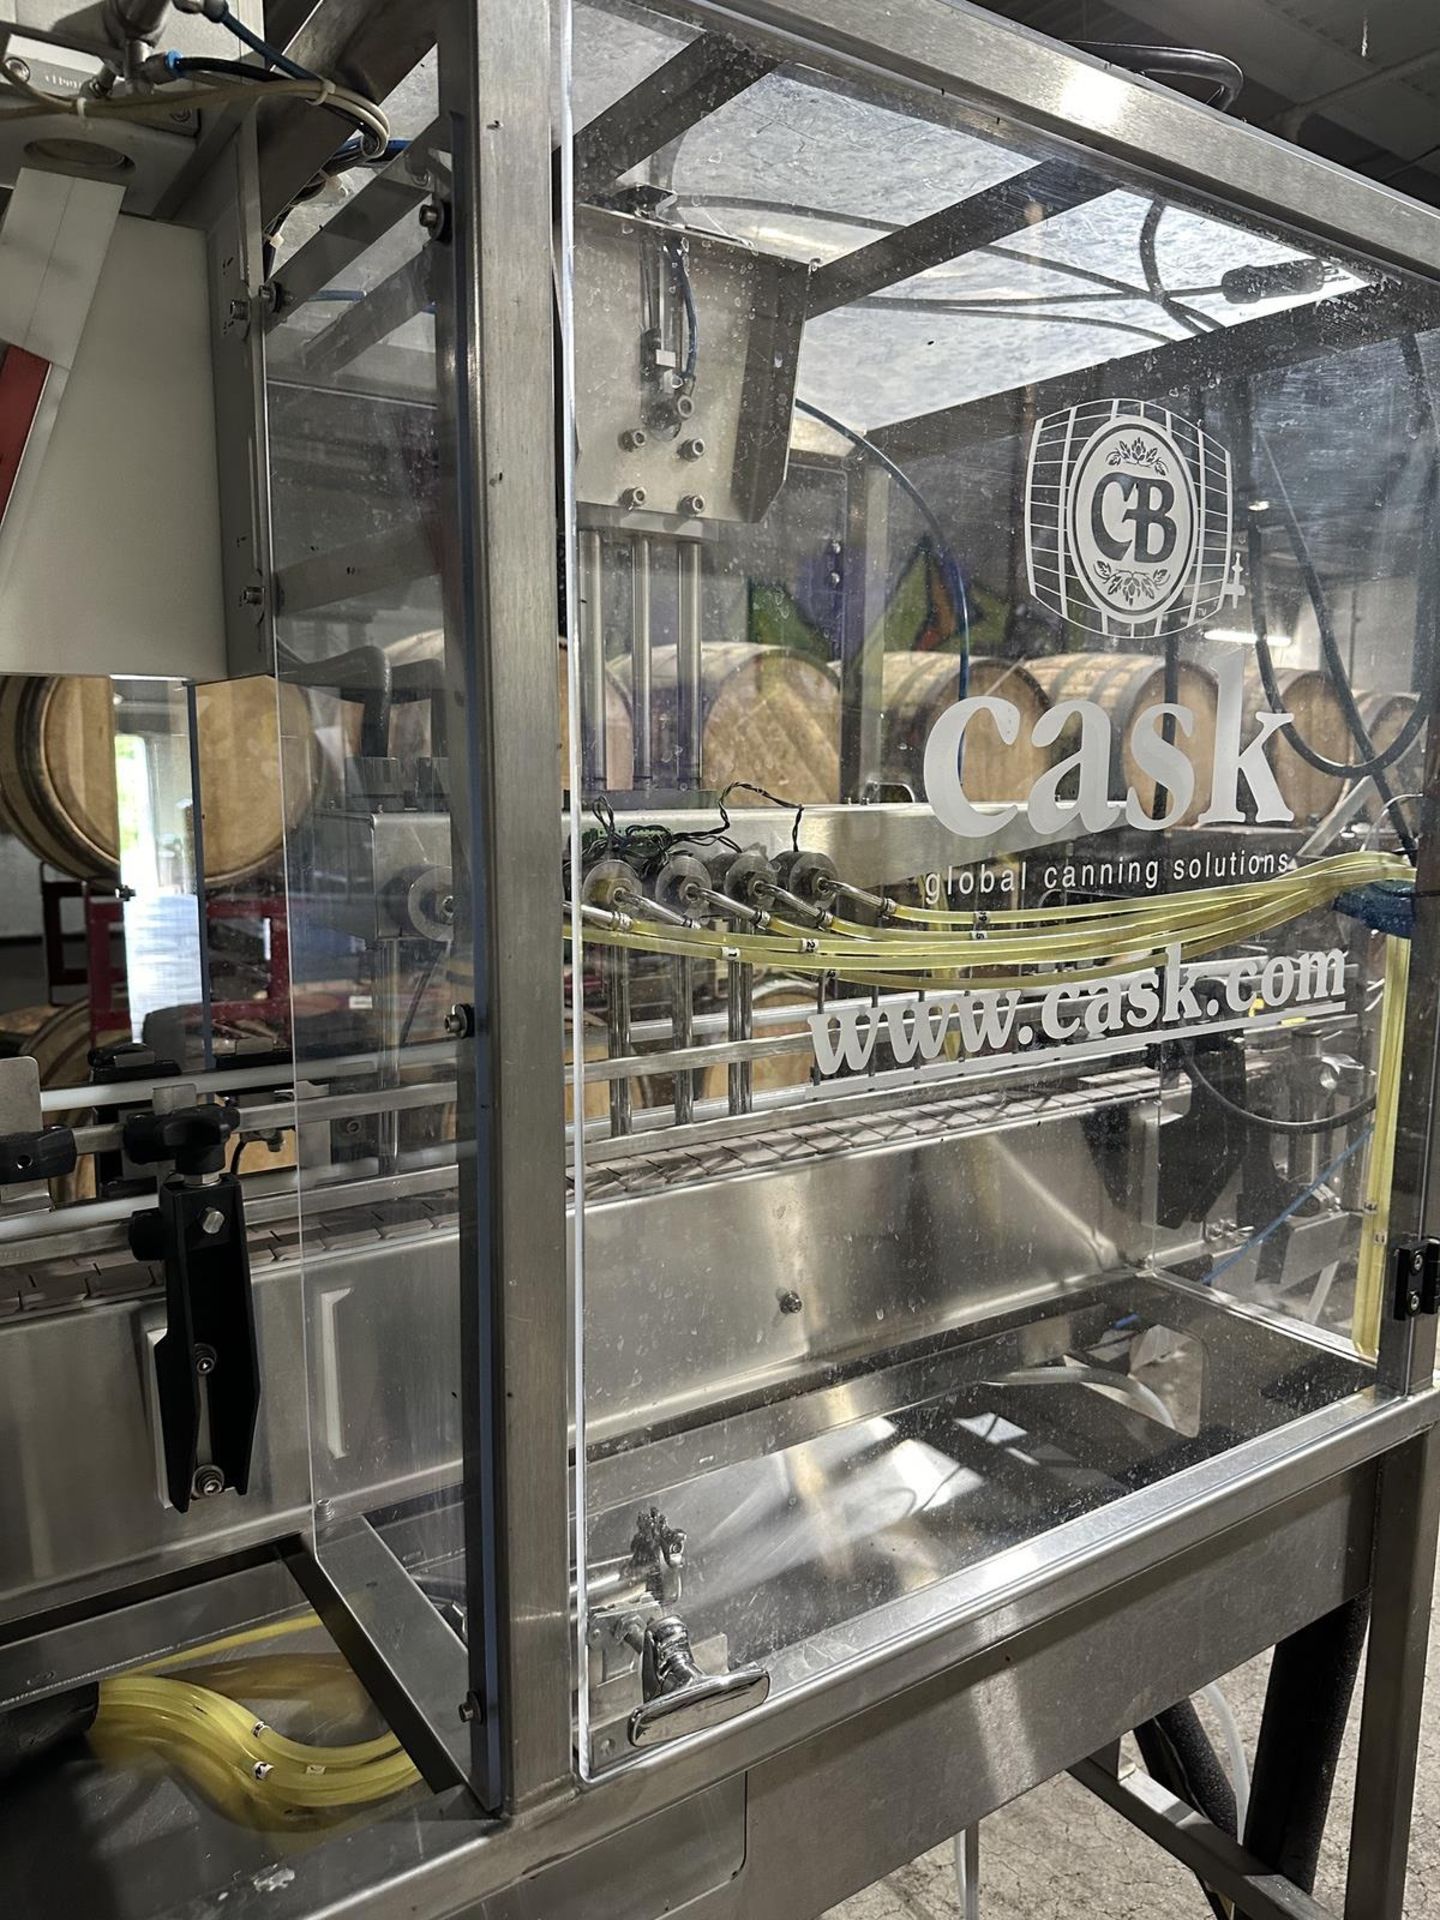 2019 Cask Model ACS-VS 6-Head Canning Line, Single Head Seamer, with Depalletizer, | Rig Fee $1500 - Image 6 of 12